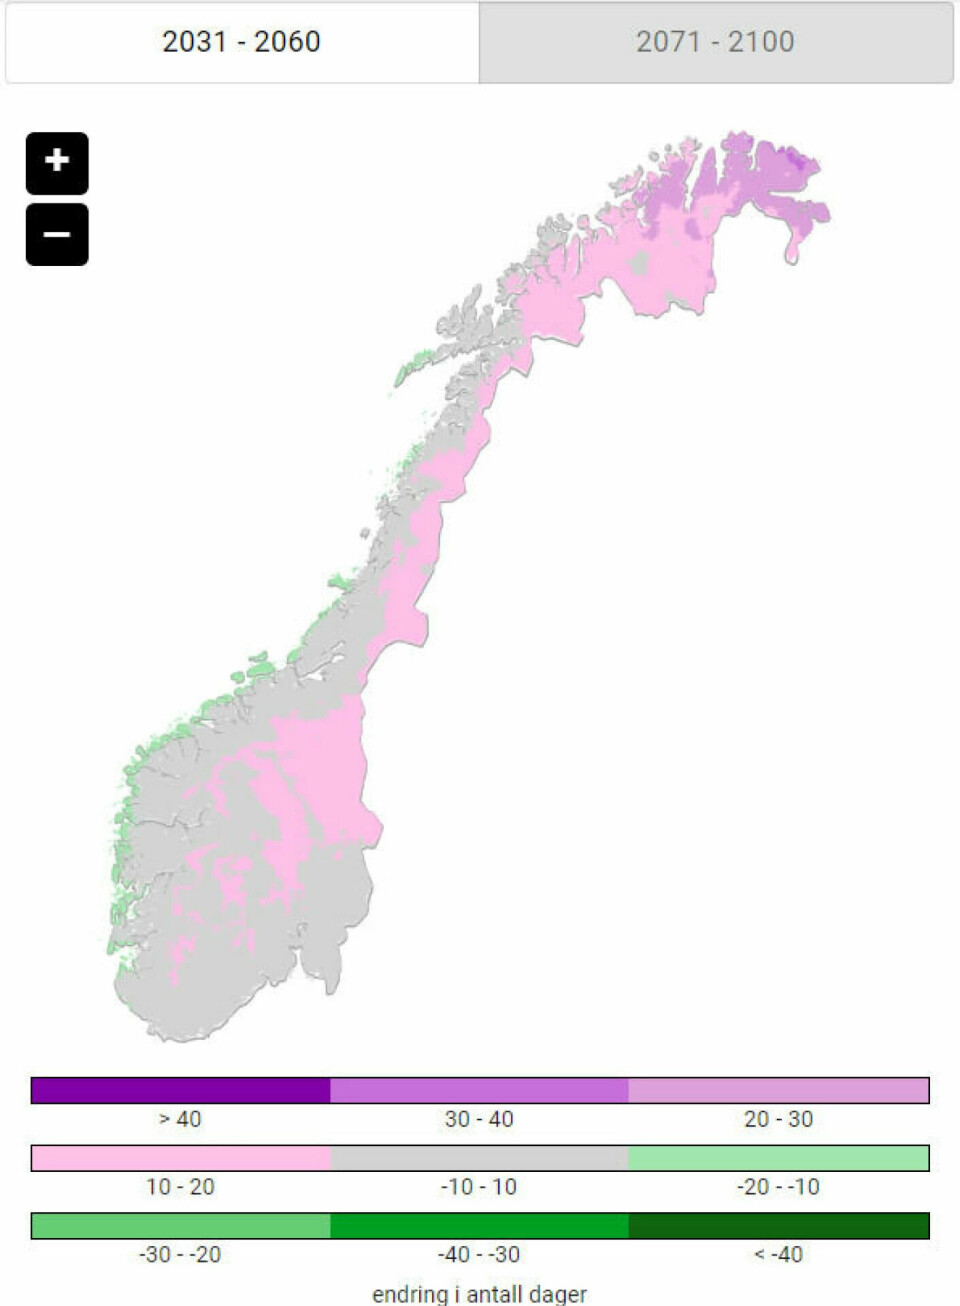 This map shows calculated changes in the number of days with temperatures above zero degrees C from 2031-2060, compared to 1971-2000. The calculations are based on a scenario with medium greenhouse gas emissions. The areas with pink and purple will be subject to more swings between above and below freezing temperatures, while the green areas will have fewer swings.